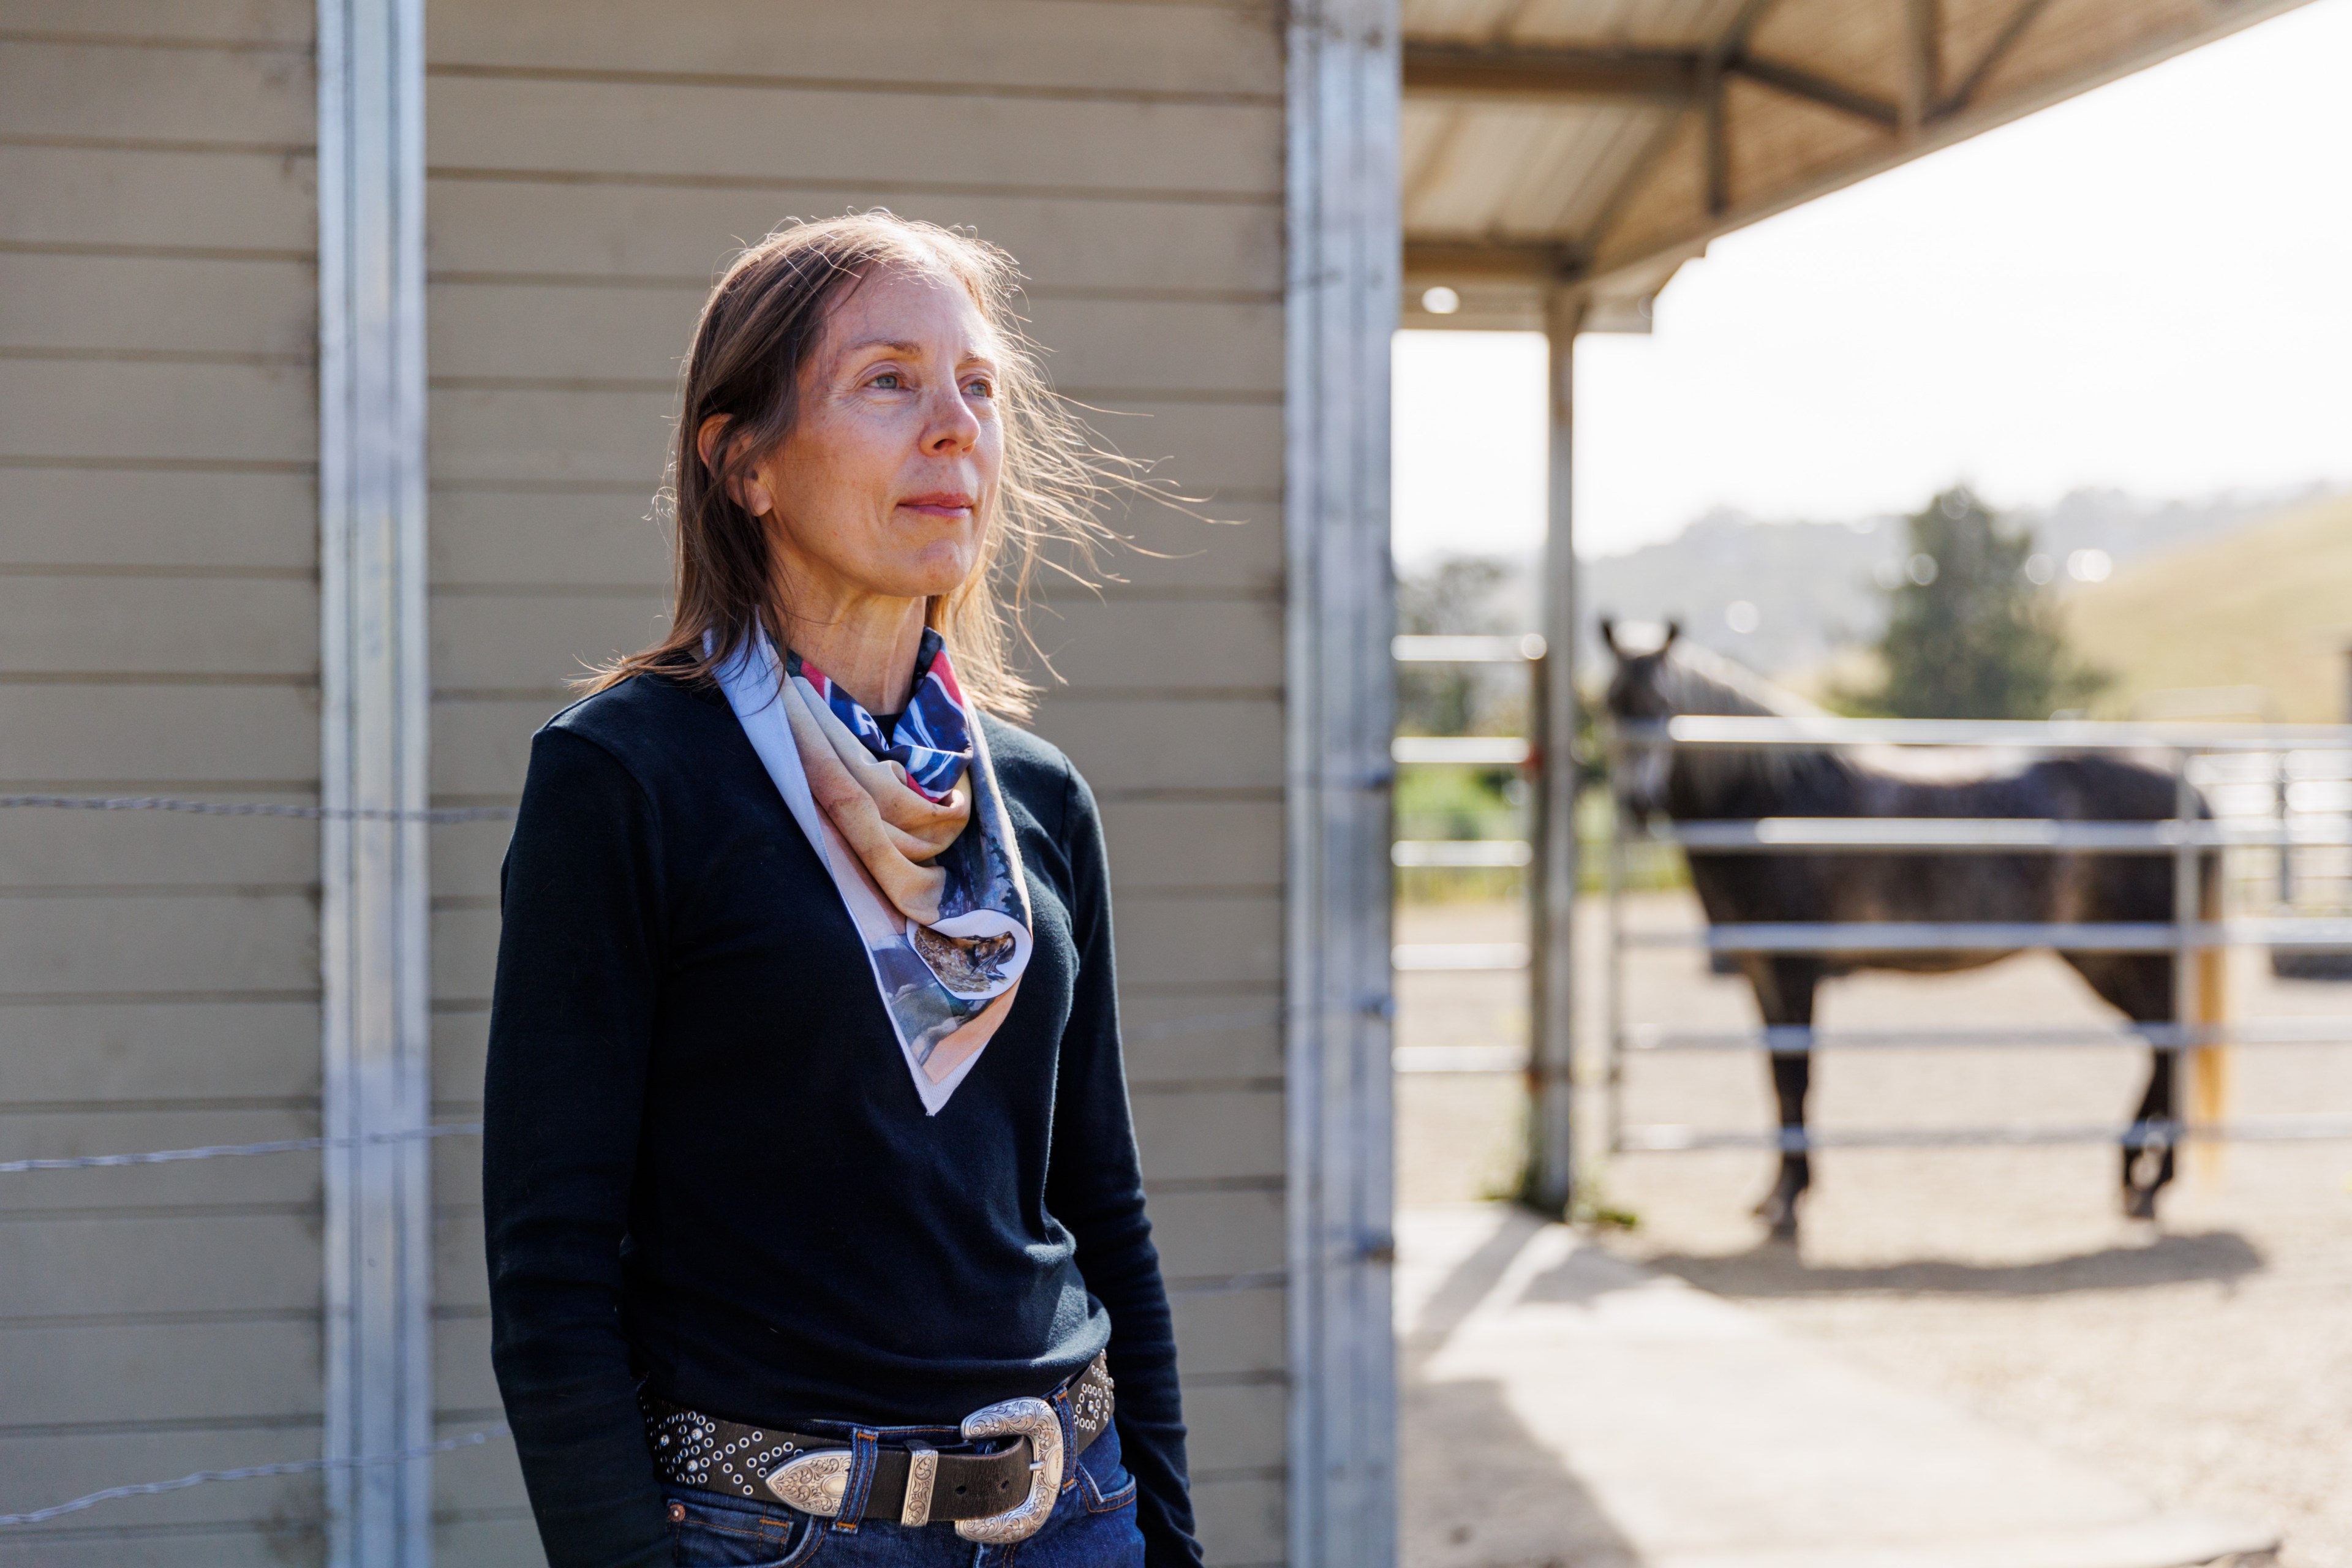 A woman with a colorful scarf and a black shirt stands outside near a timber building. A horse is visible in the background, enclosed in a fenced area.